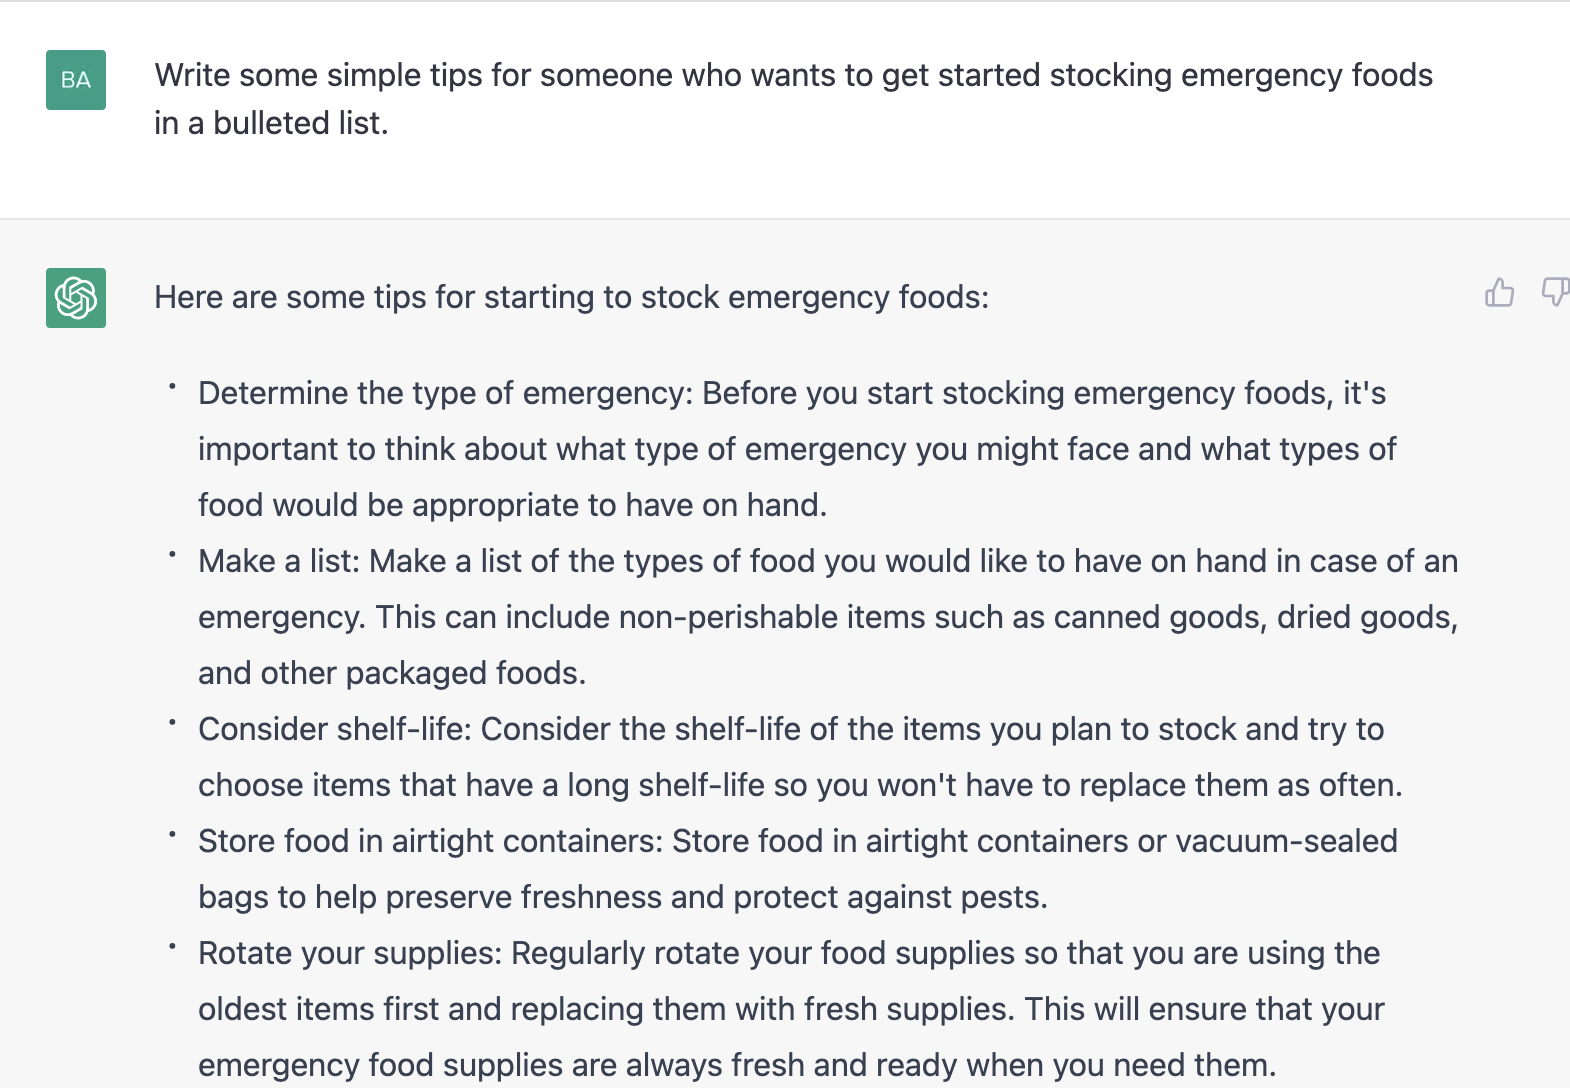 ChatGPT prompt about writing some simple tips for someone who wants to get started stocking emergency foods